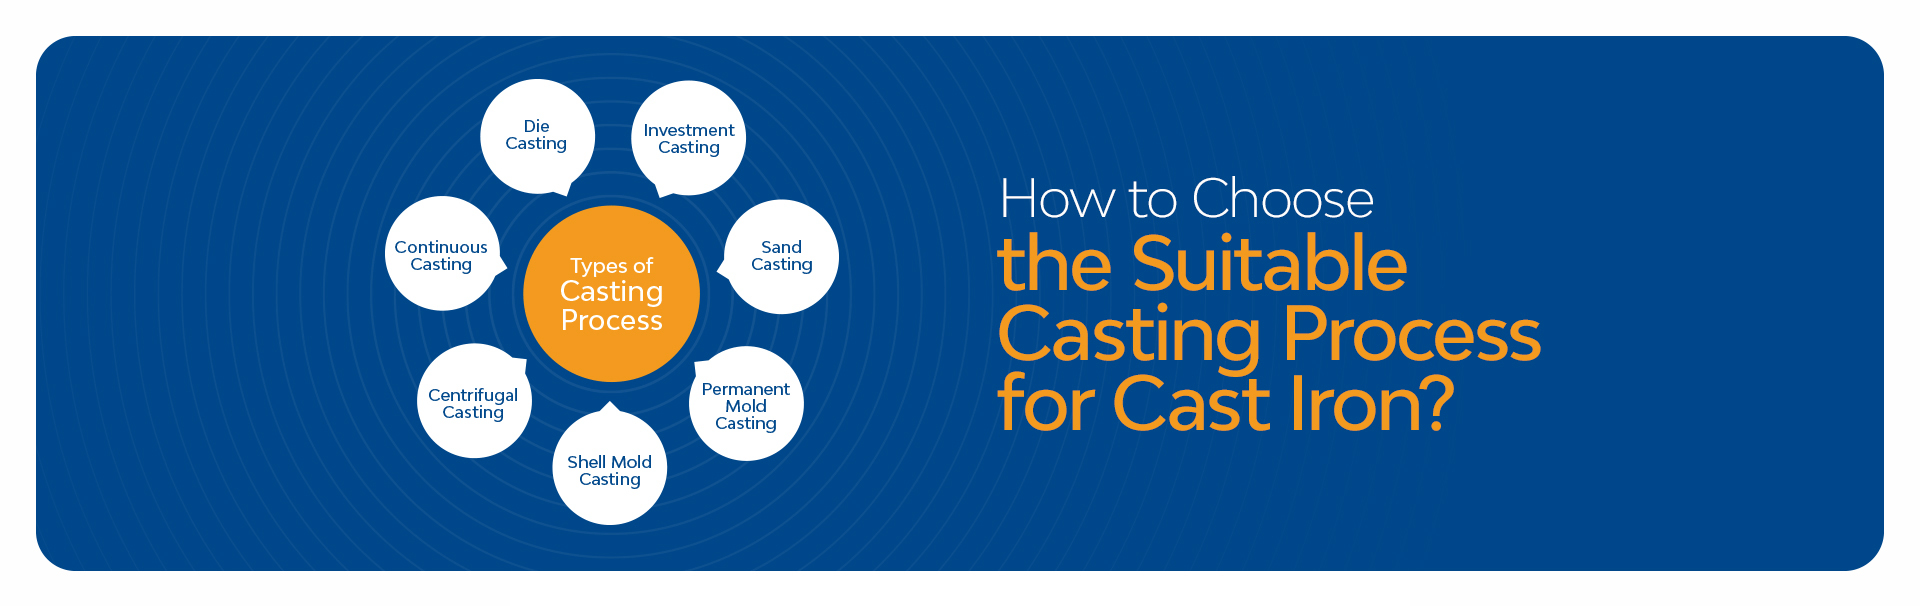 How to Choose the Suitable Casting Process for Cast Iron